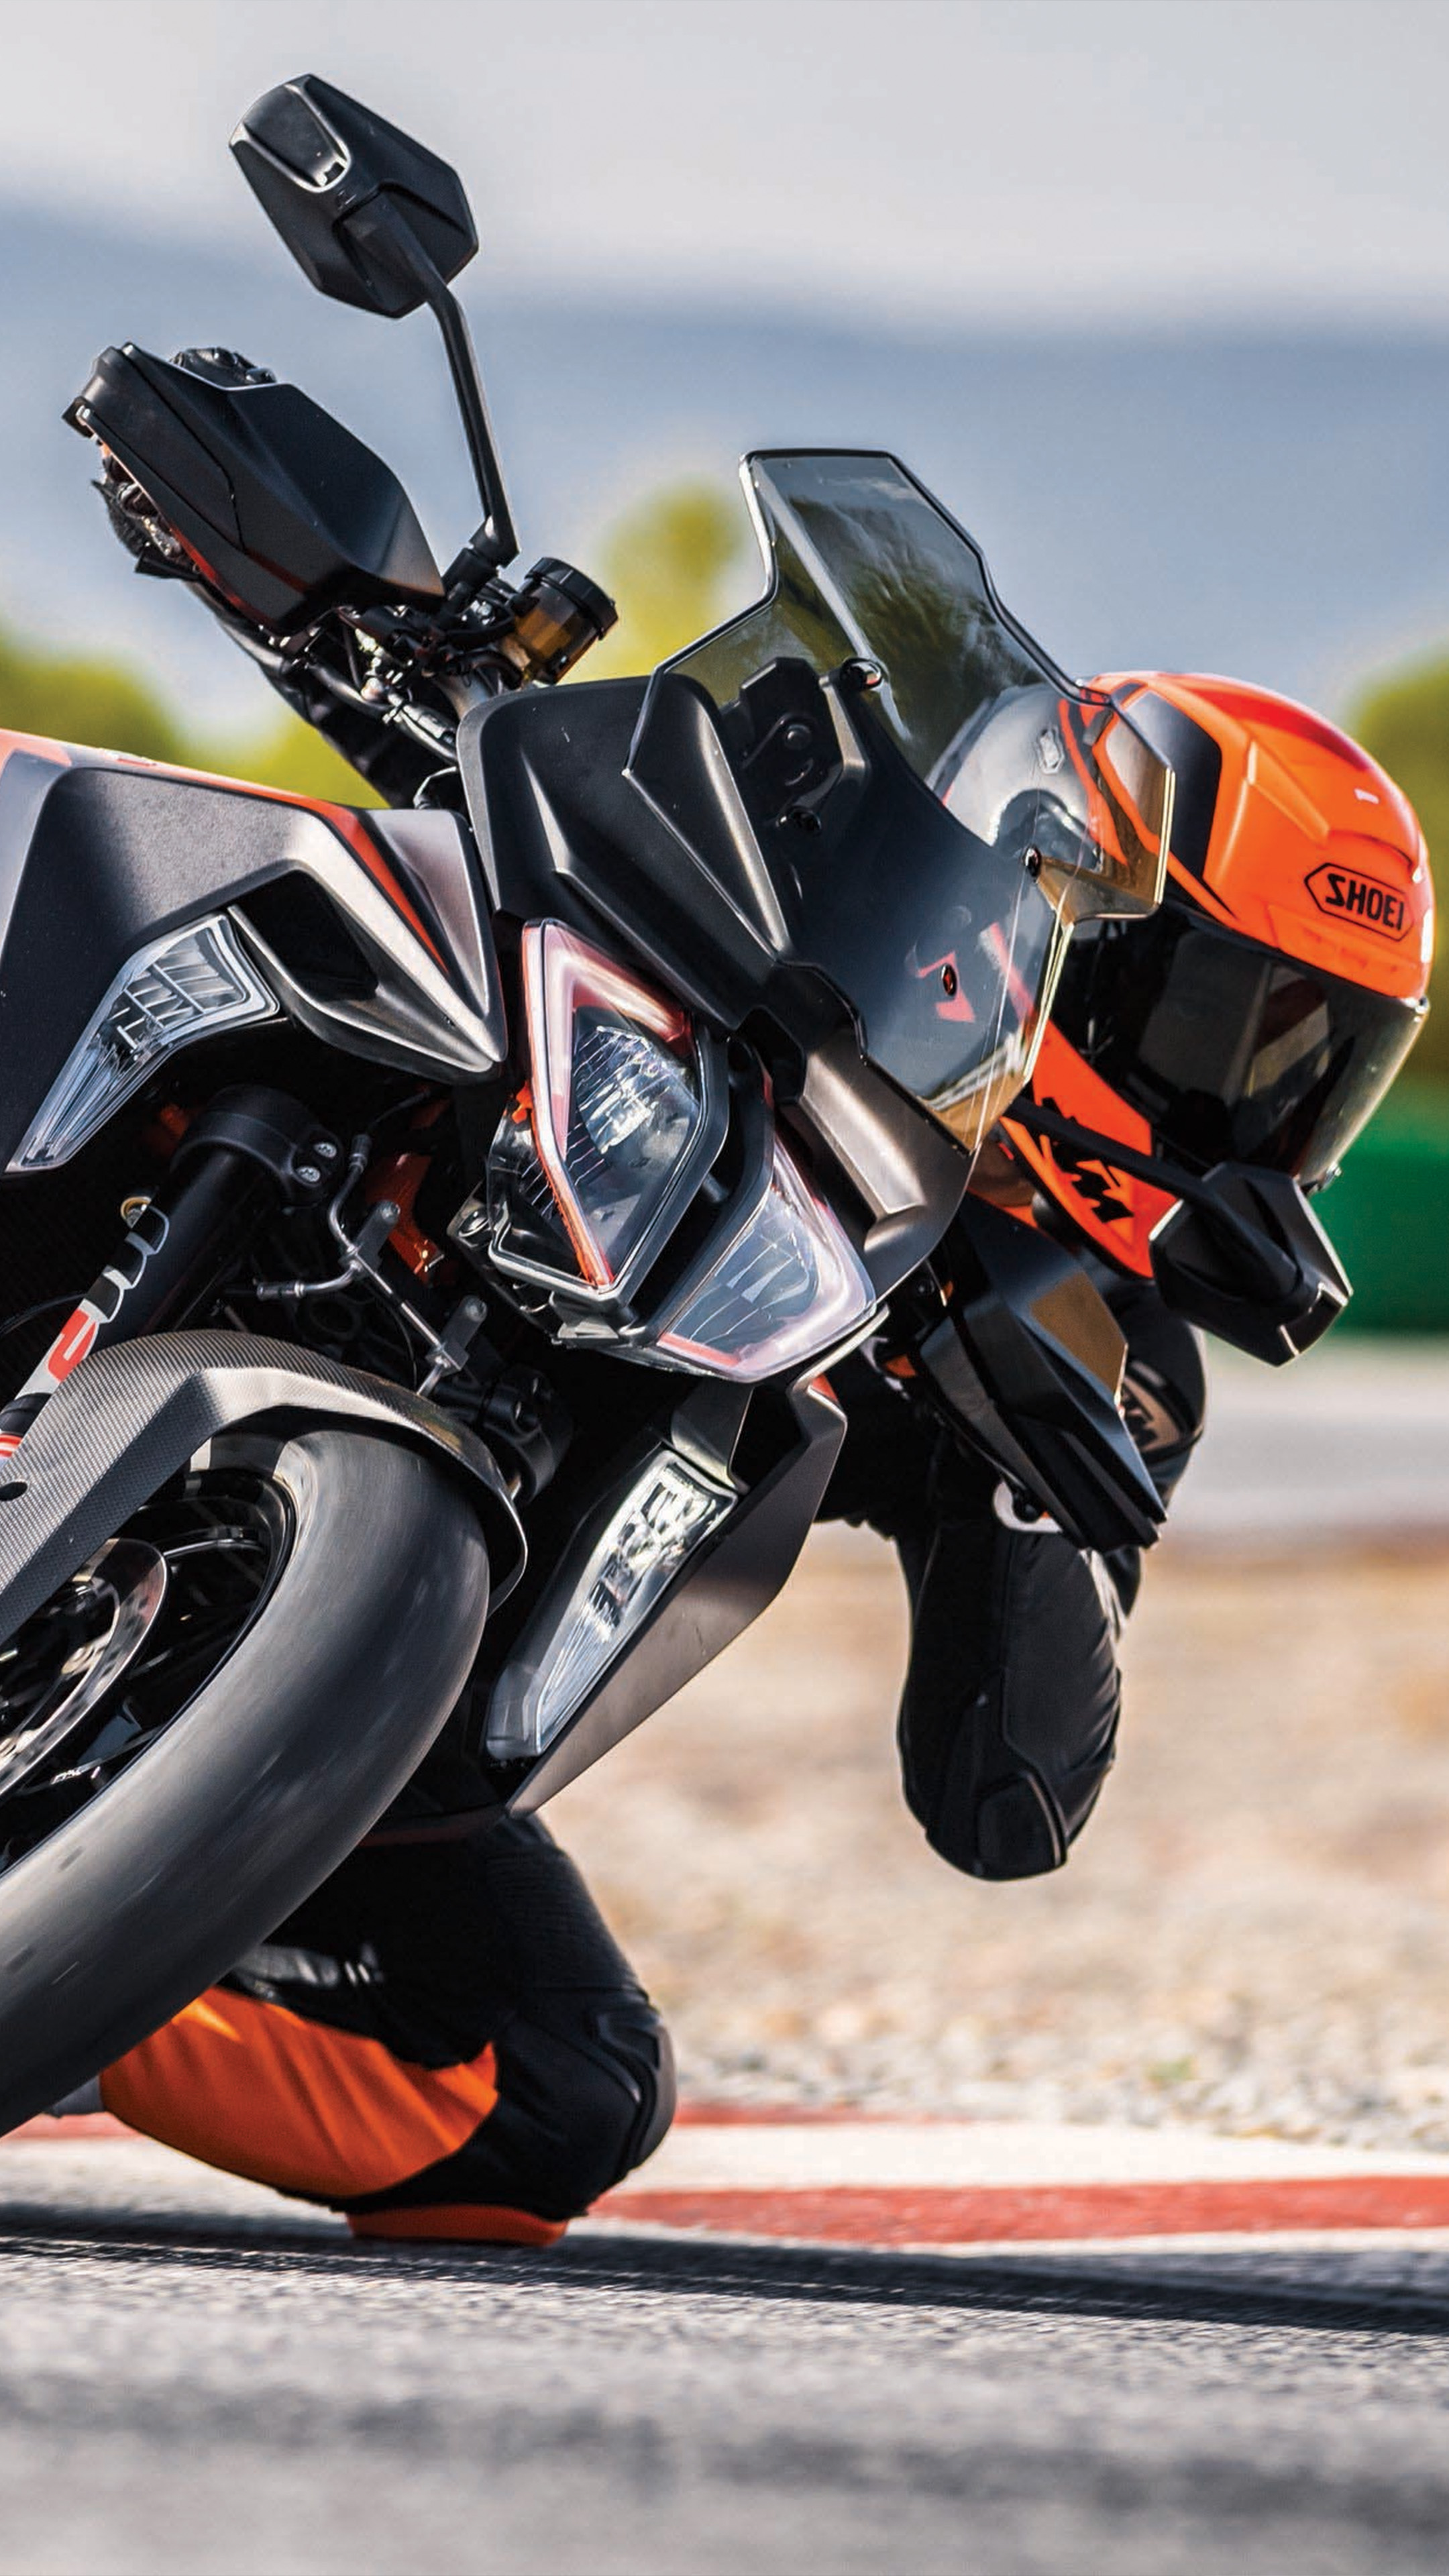 Introduced the new Naked KTM 890 Duke R 2020